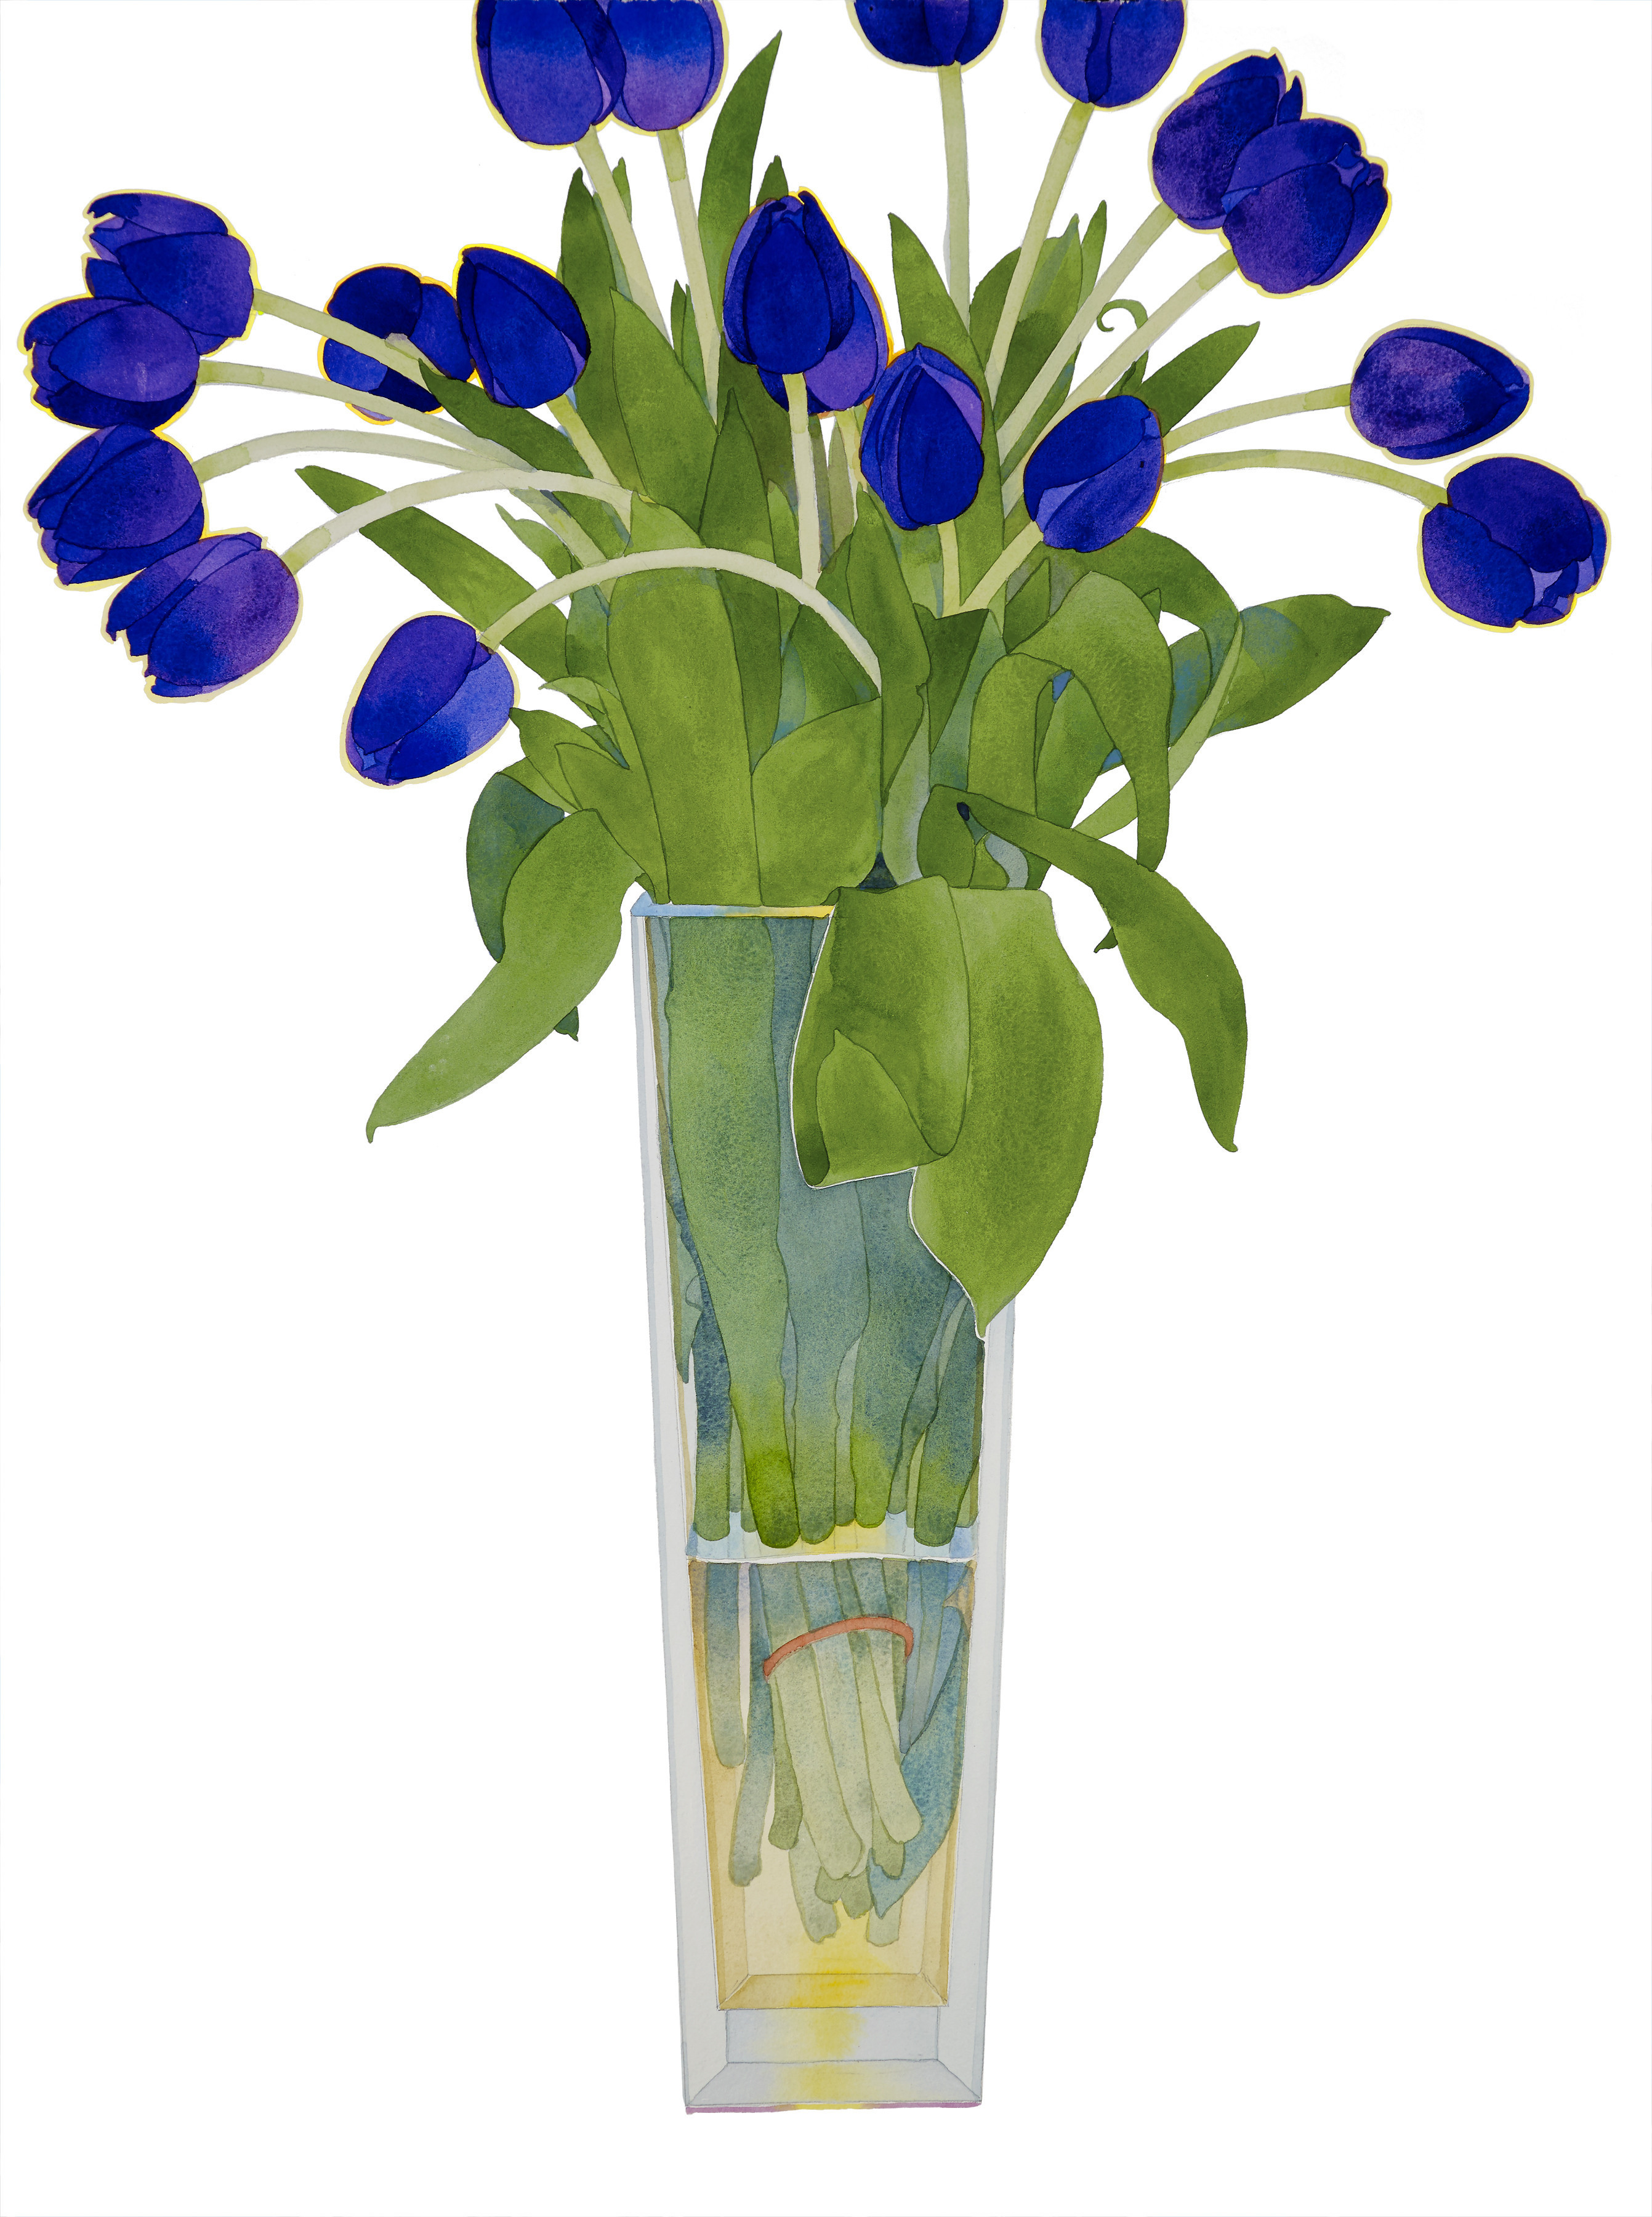 Blue tulips in a tall vase